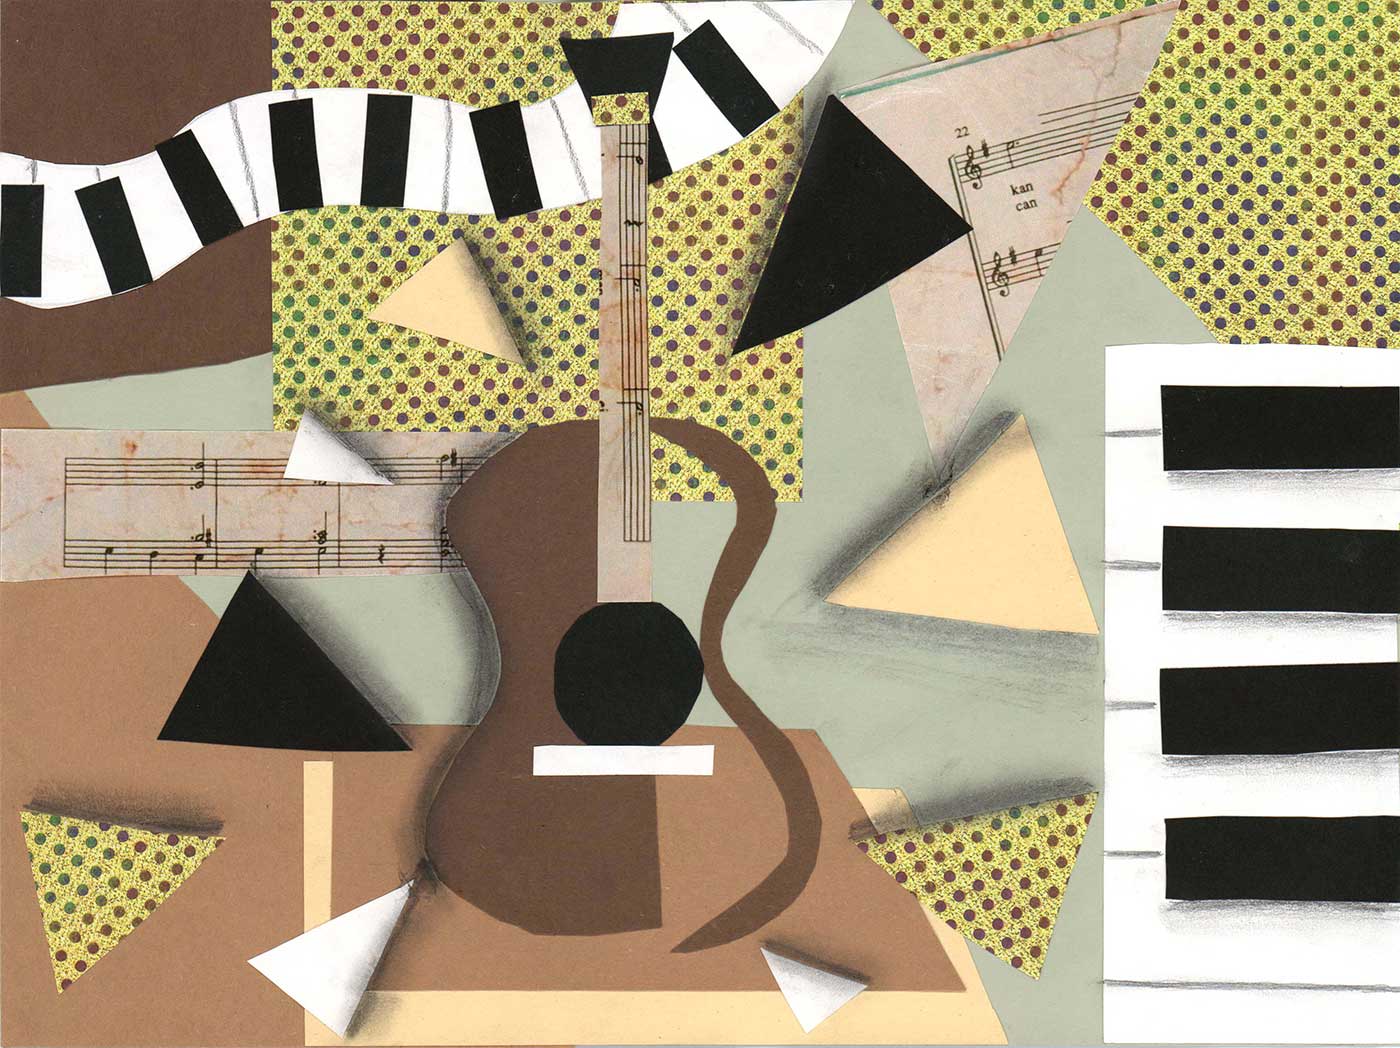 Paper collage of a guitar and a piano keyboard surrounded by a potted pattern and geometric shapes.